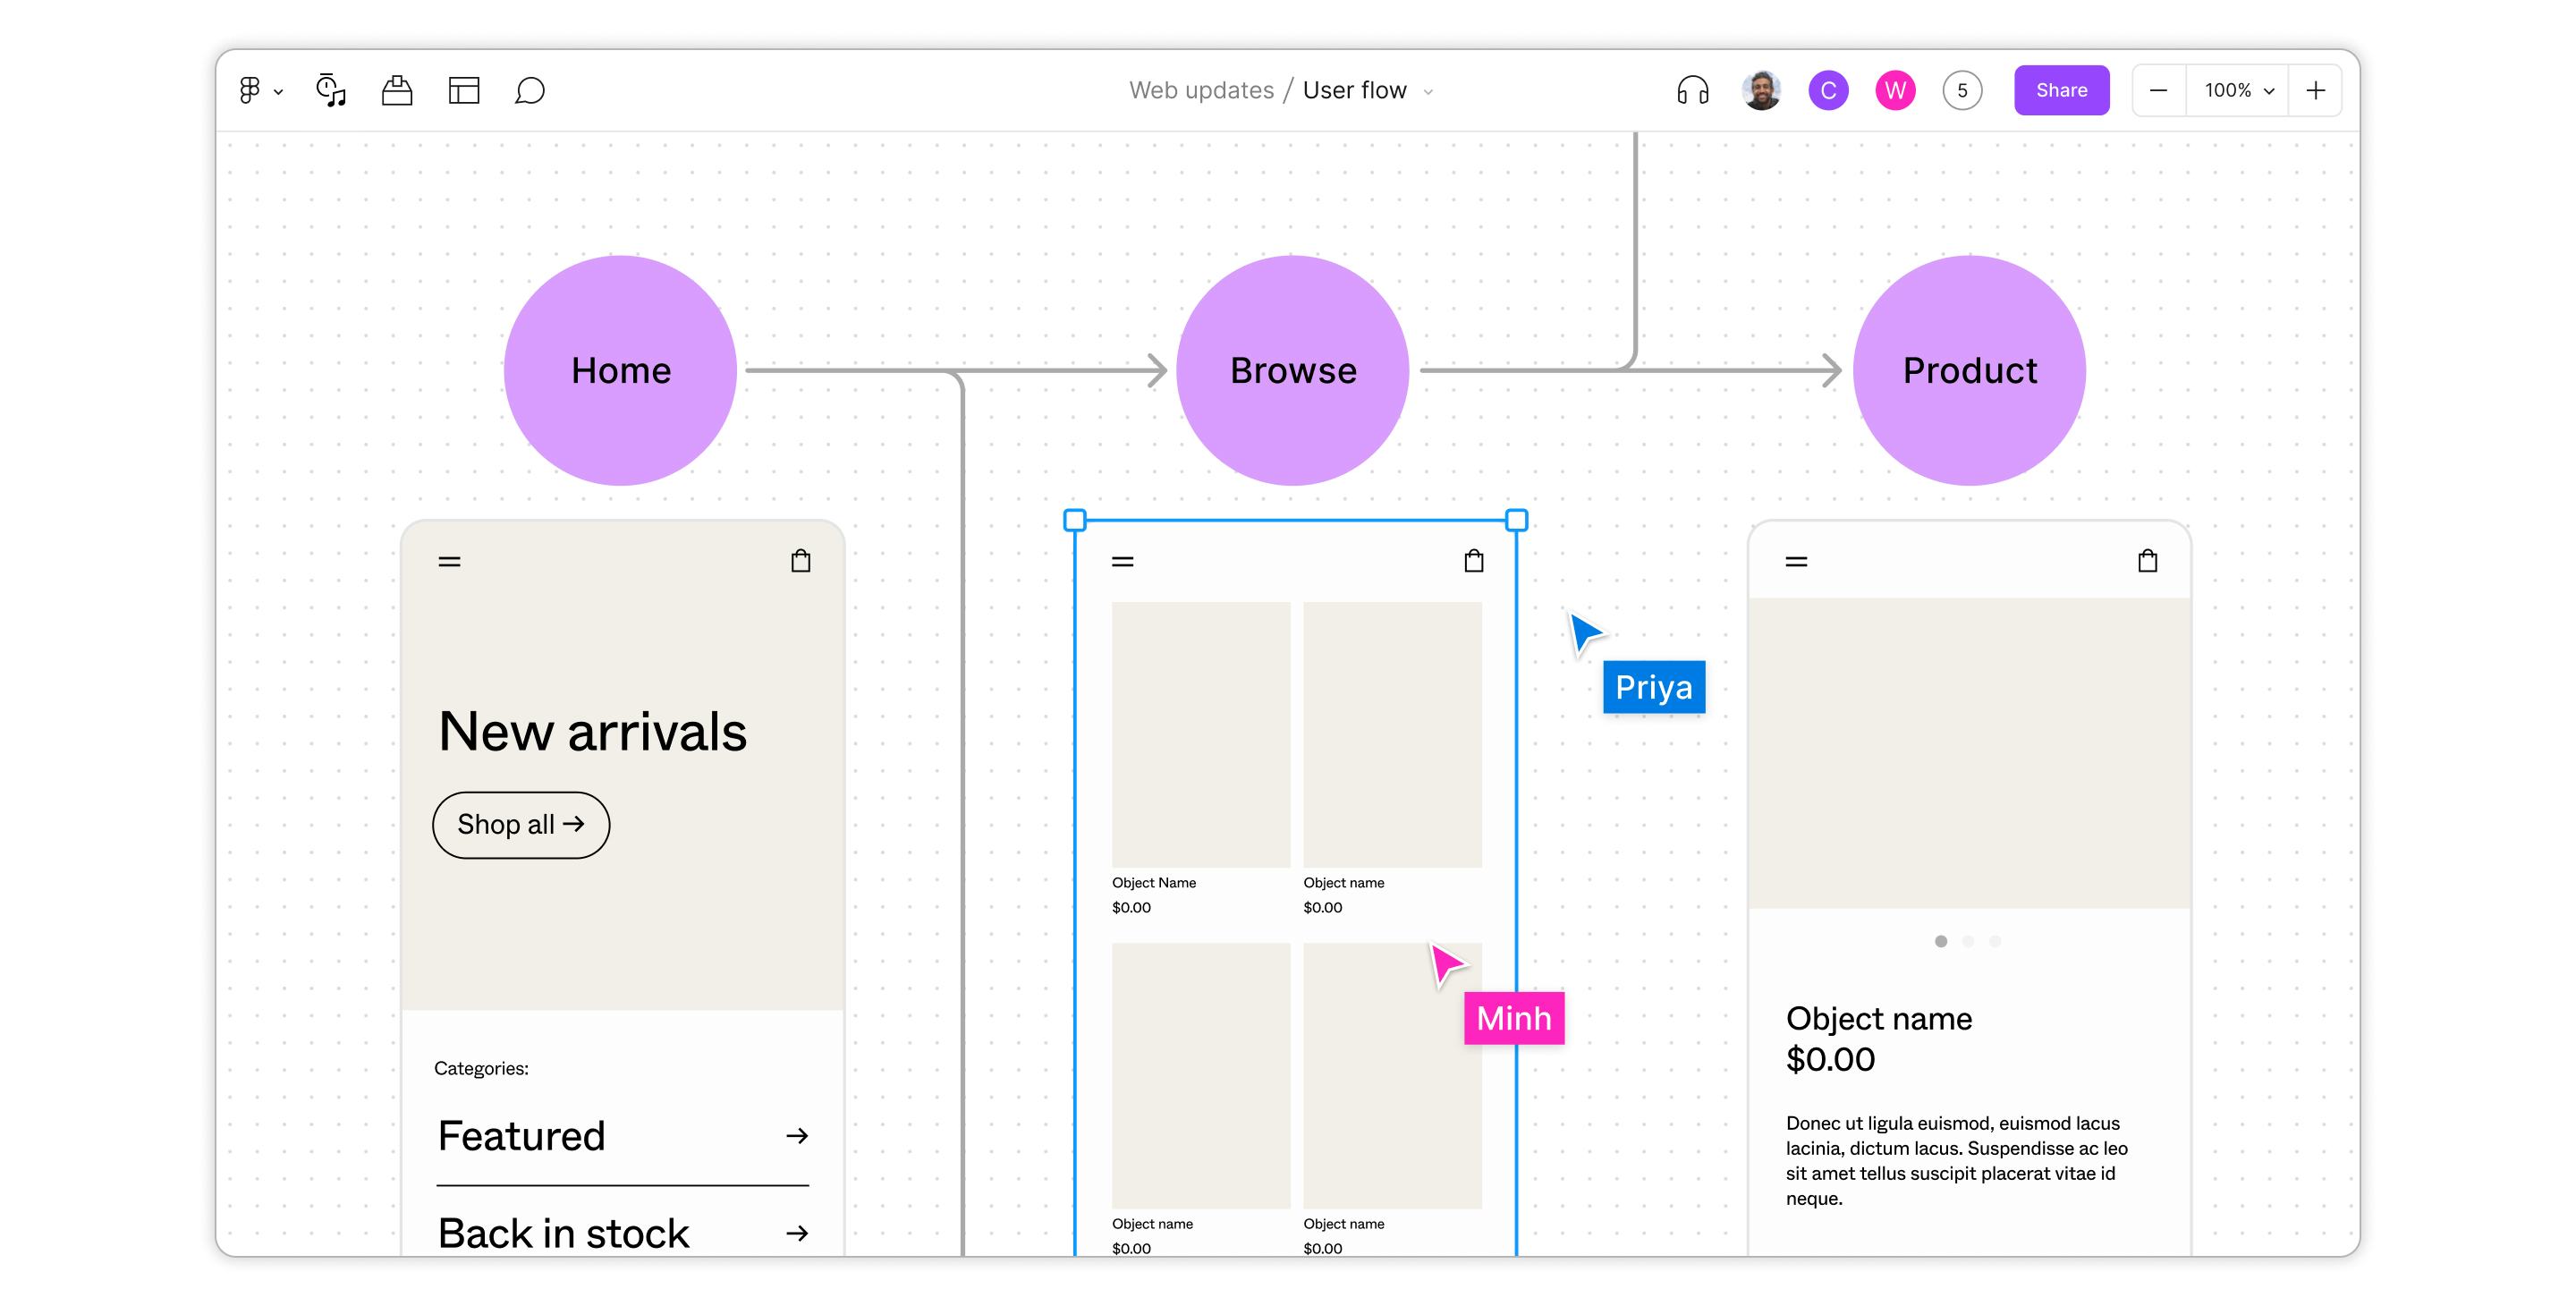 FigJam Software - Bring designs into your user journey diagrams to show stakeholders how users will experience your flows.